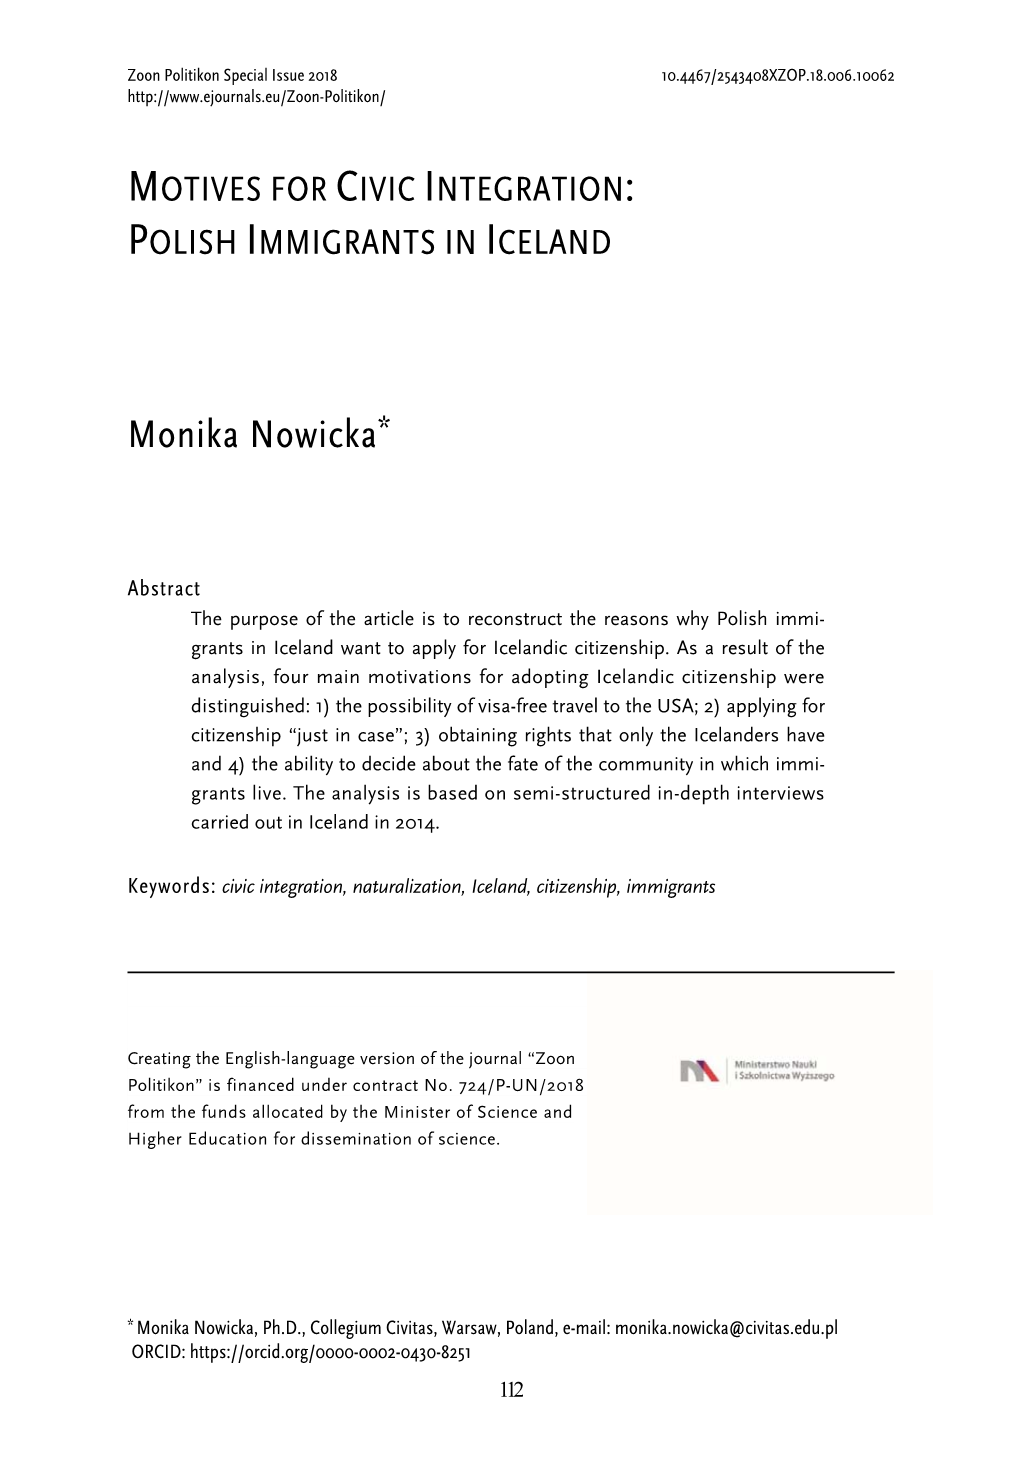 Motives for Civic Integration: Polish Immigrants in Iceland